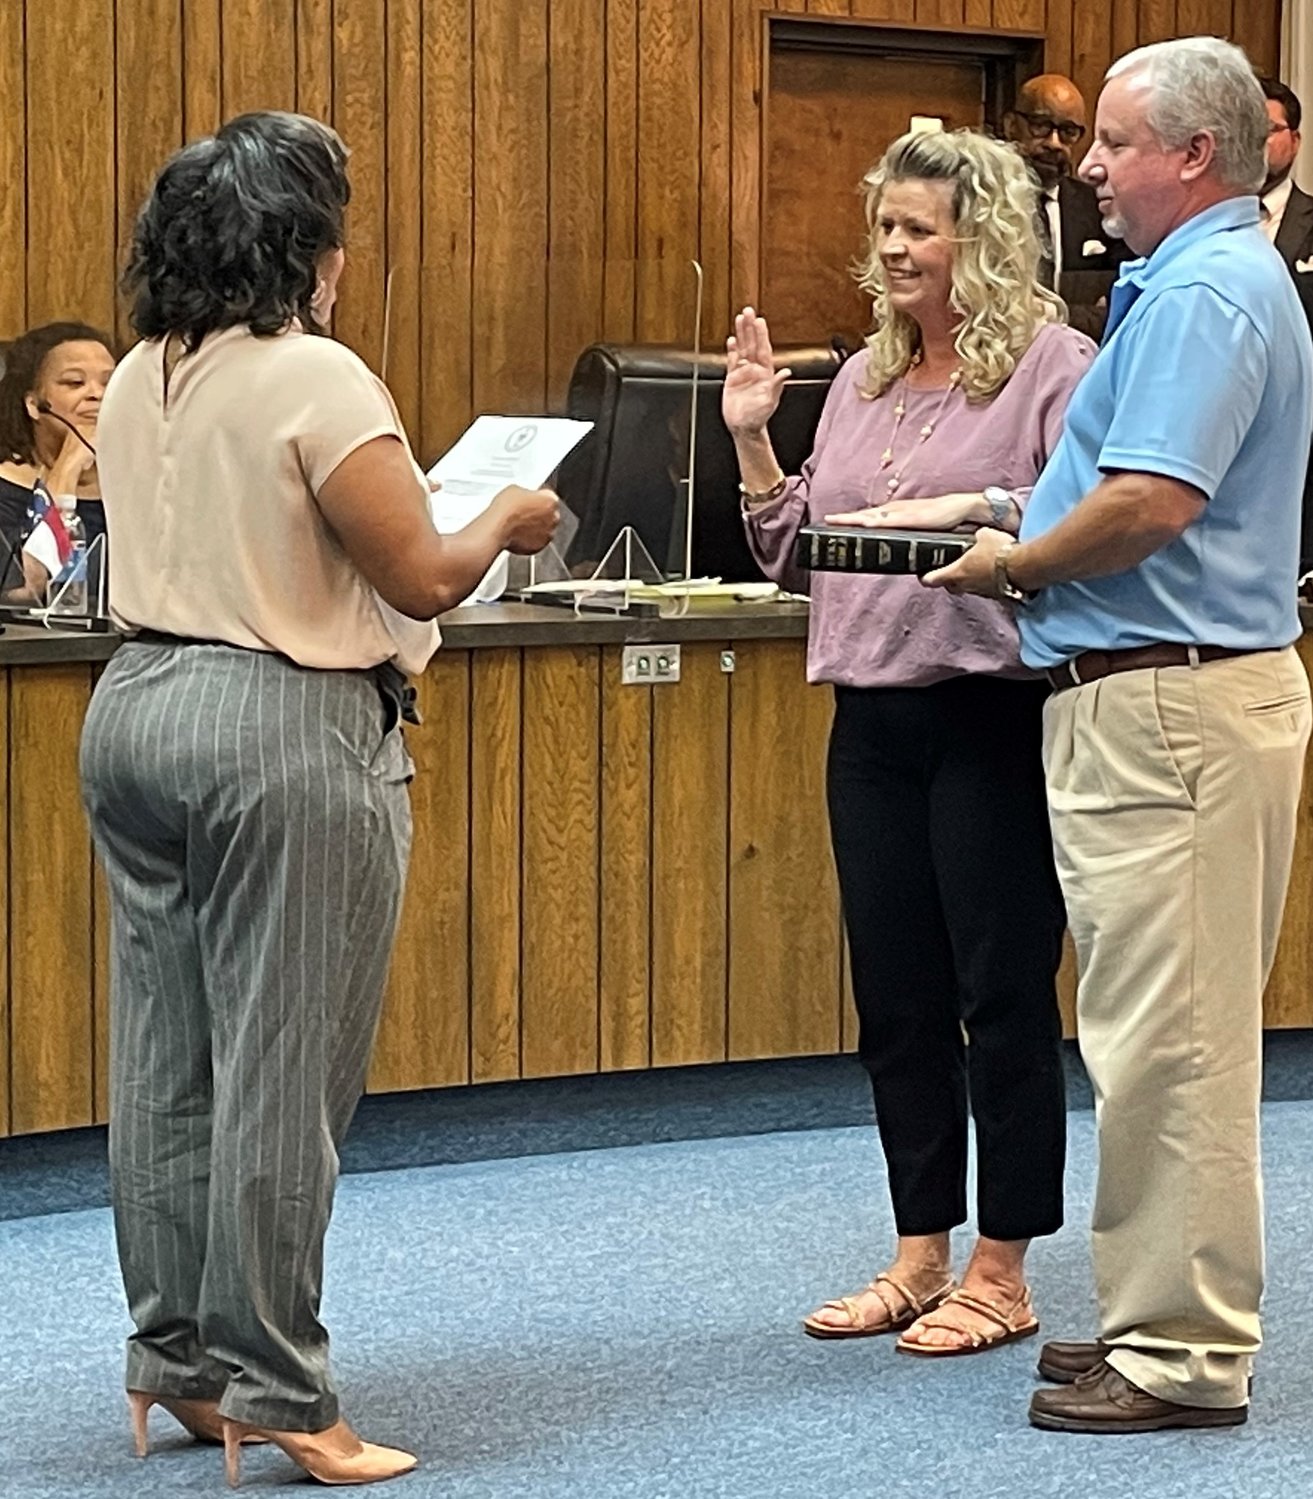 Spring Lake Mayor Kia Anthony administers the oath of office to Patricia Hickman, who was sworn in as the interim town clerk on Monday night.